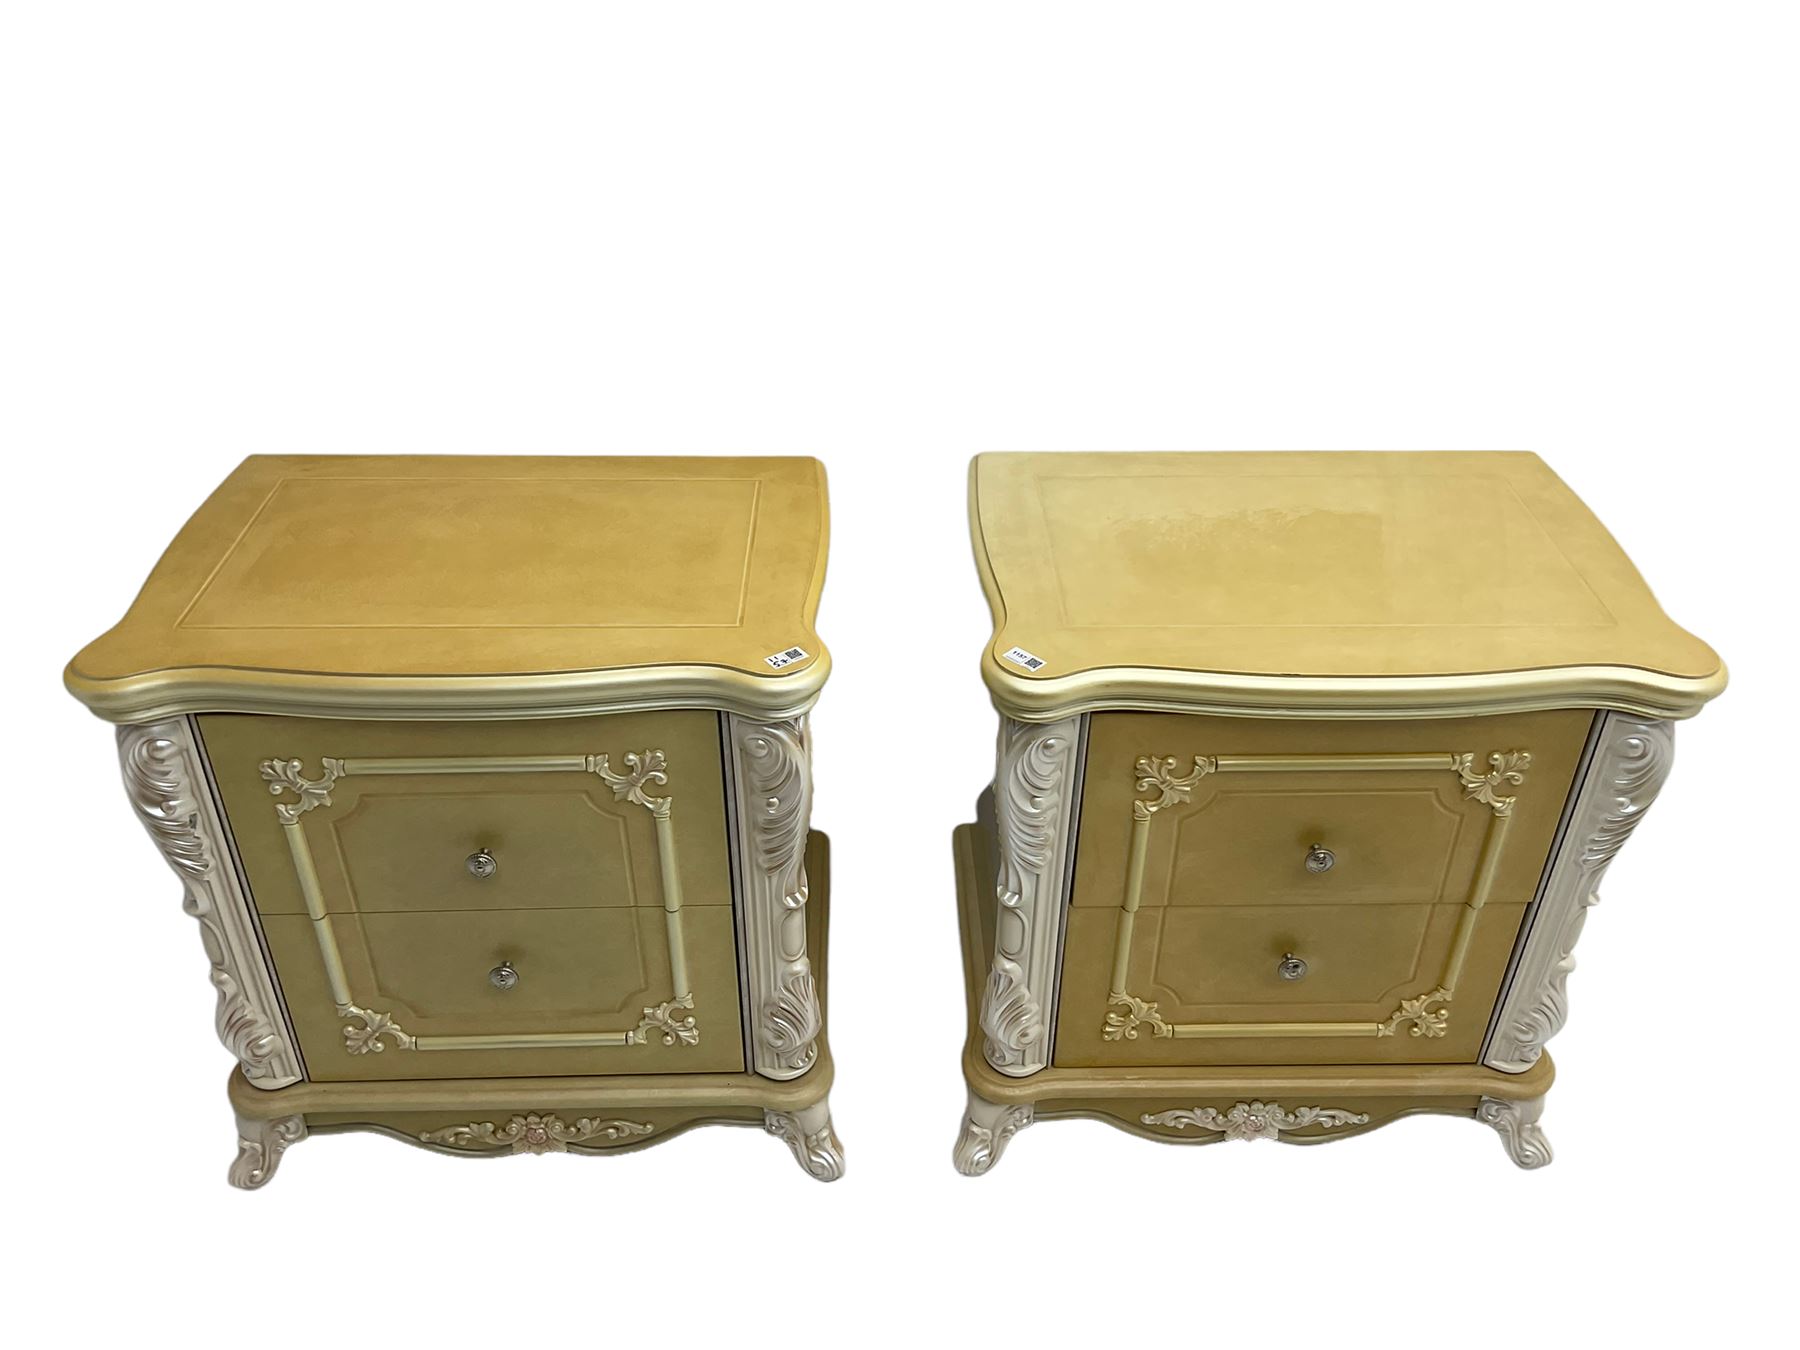 Pair Rococo style wood finish bedside chests - Image 2 of 6